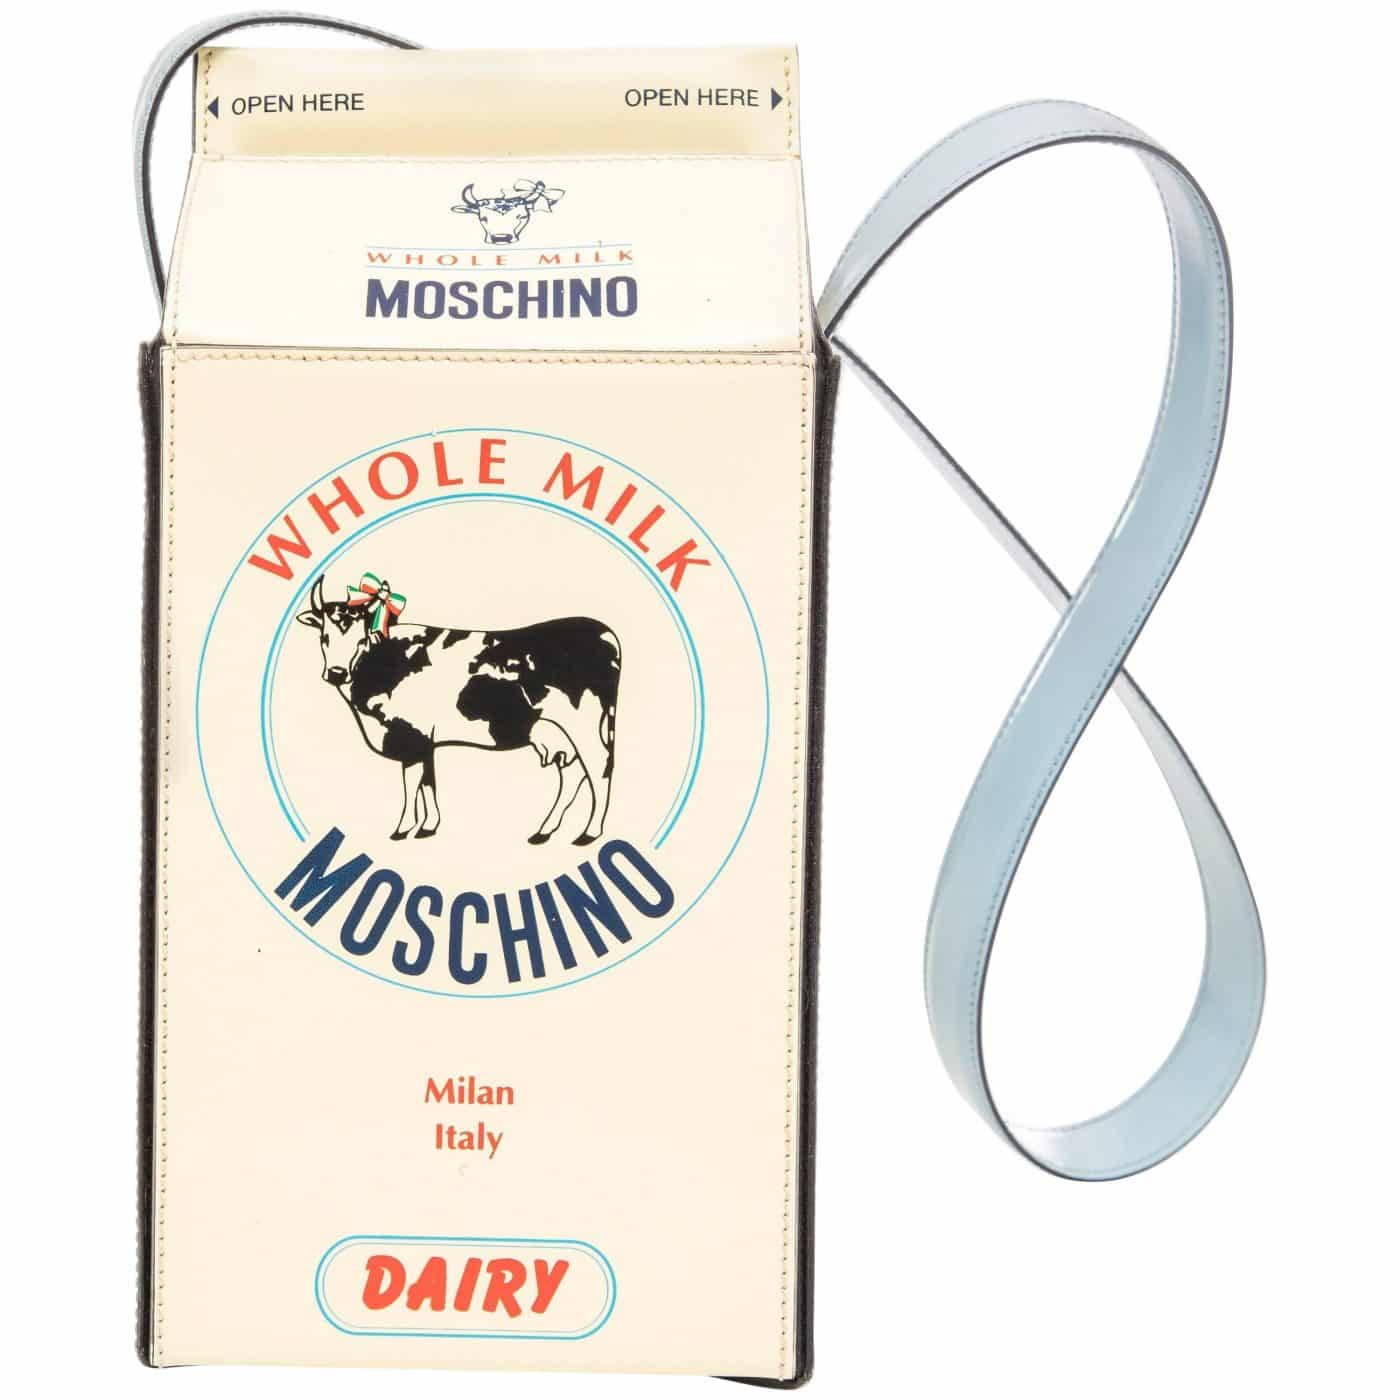 A Moschino handbag shaped and decorated like a milk carton, offered by Evolution